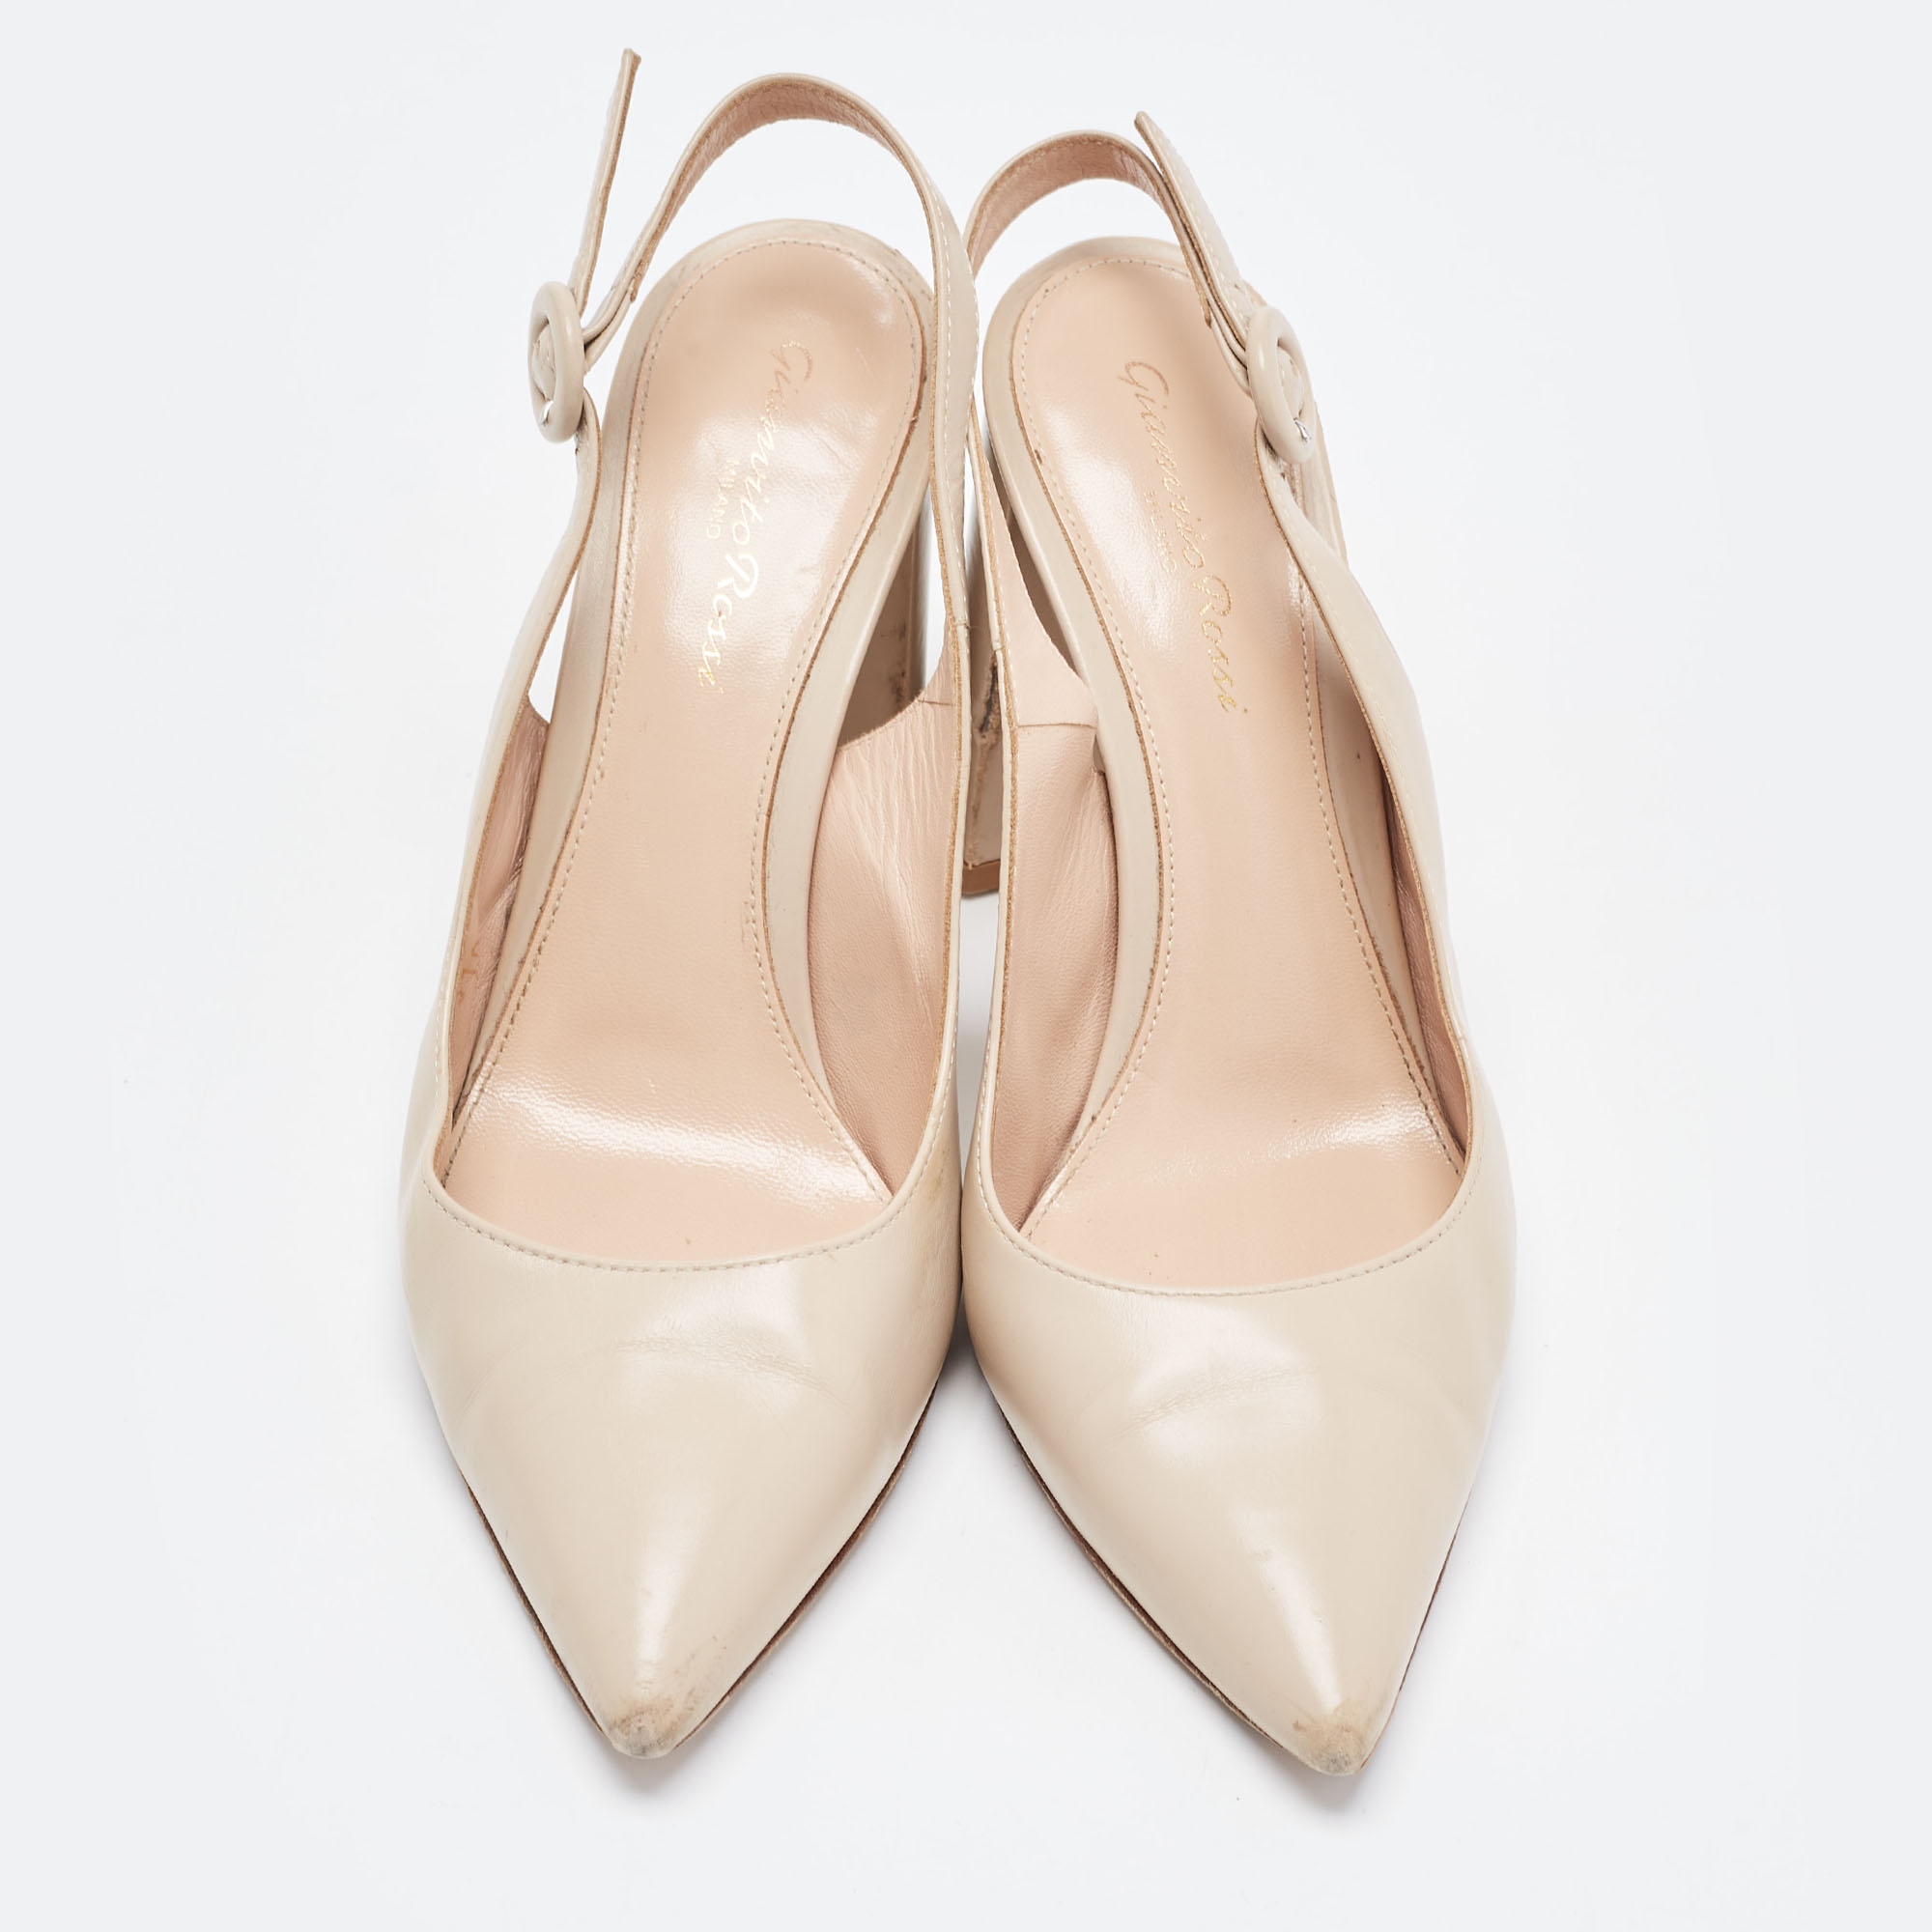 Gianvito Rossi Beige Leather Slingback Pumps Size 36.5